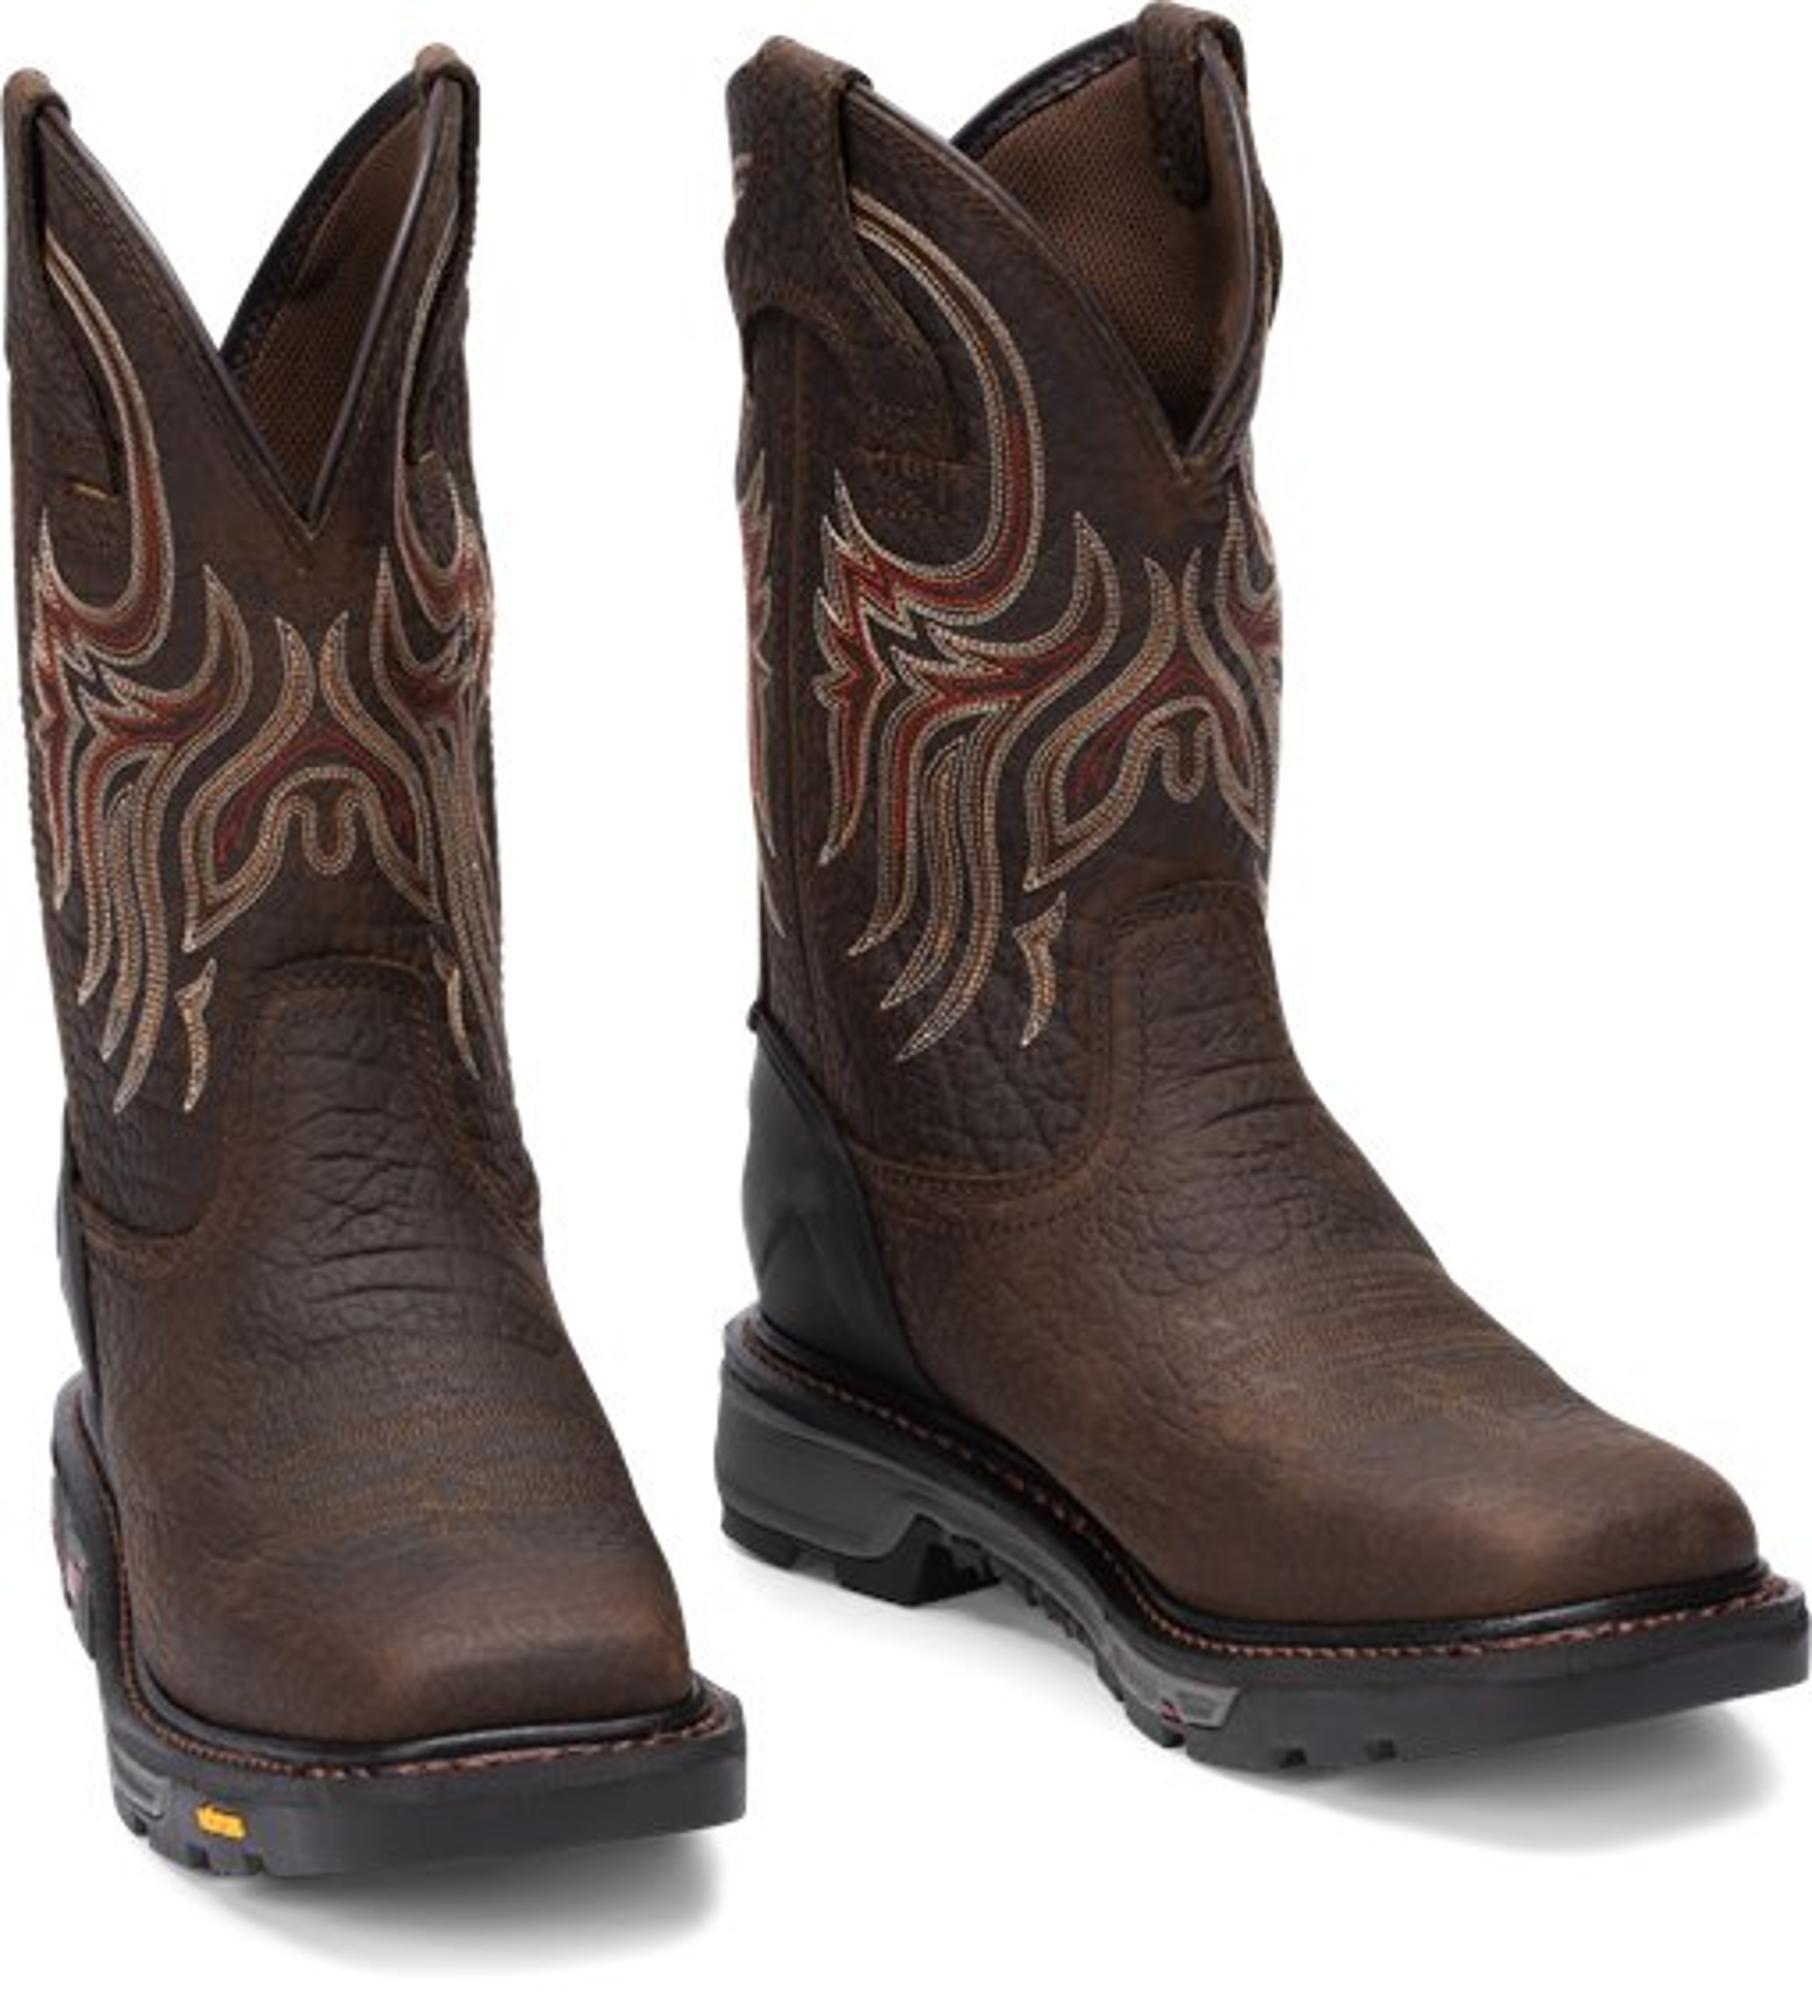 Justin Driscoll Work Boot